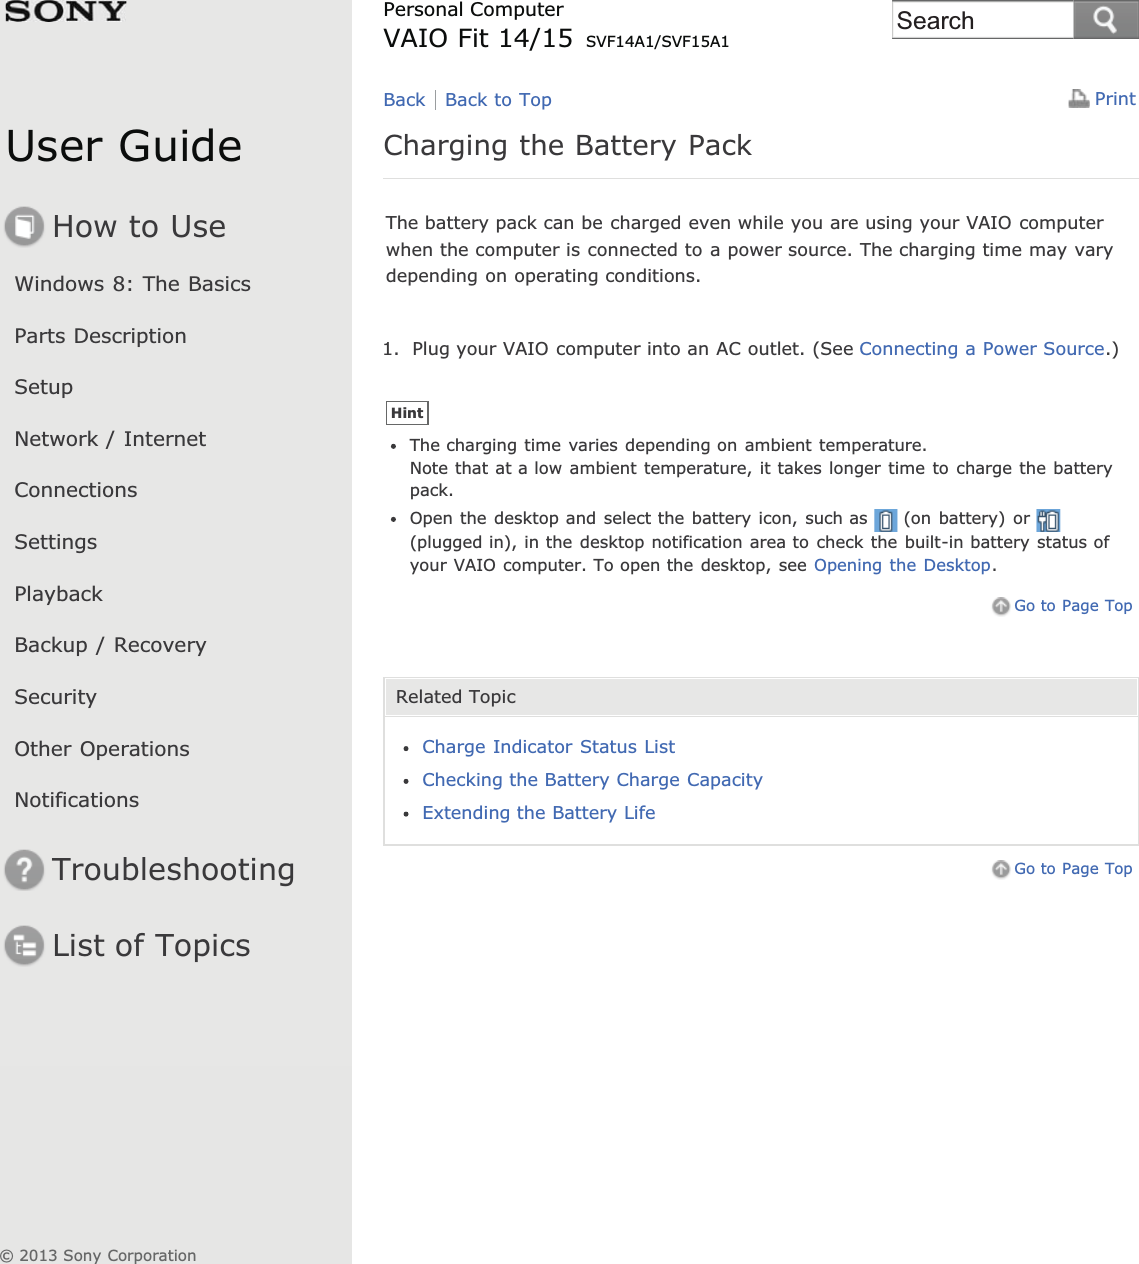 User GuideHow to UseWindows 8: The BasicsParts DescriptionSetupNetwork / InternetConnectionsSettingsPlaybackBackup / RecoverySecurityOther OperationsNotificationsTroubleshootingList of TopicsPrintPersonal ComputerVAIO Fit 14/15 SVF14A1/SVF15A1Charging the Battery PackThe battery pack can be charged even while you are using your VAIO computerwhen the computer is connected to a power source. The charging time may varydepending on operating conditions.1. Plug your VAIO computer into an AC outlet. (See Connecting a Power Source.)HintThe charging time varies depending on ambient temperature.Note that at a low ambient temperature, it takes longer time to charge the batterypack.Open the desktop and select the battery icon, such as (on battery) or(plugged in), in the desktop notification area to check the built-in battery status ofyour VAIO computer. To open the desktop, see Opening the Desktop.Go to Page TopRelated TopicCharge Indicator Status ListChecking the Battery Charge CapacityExtending the Battery LifeGo to Page TopBack Back to Top© 2013 Sony CorporationSearch